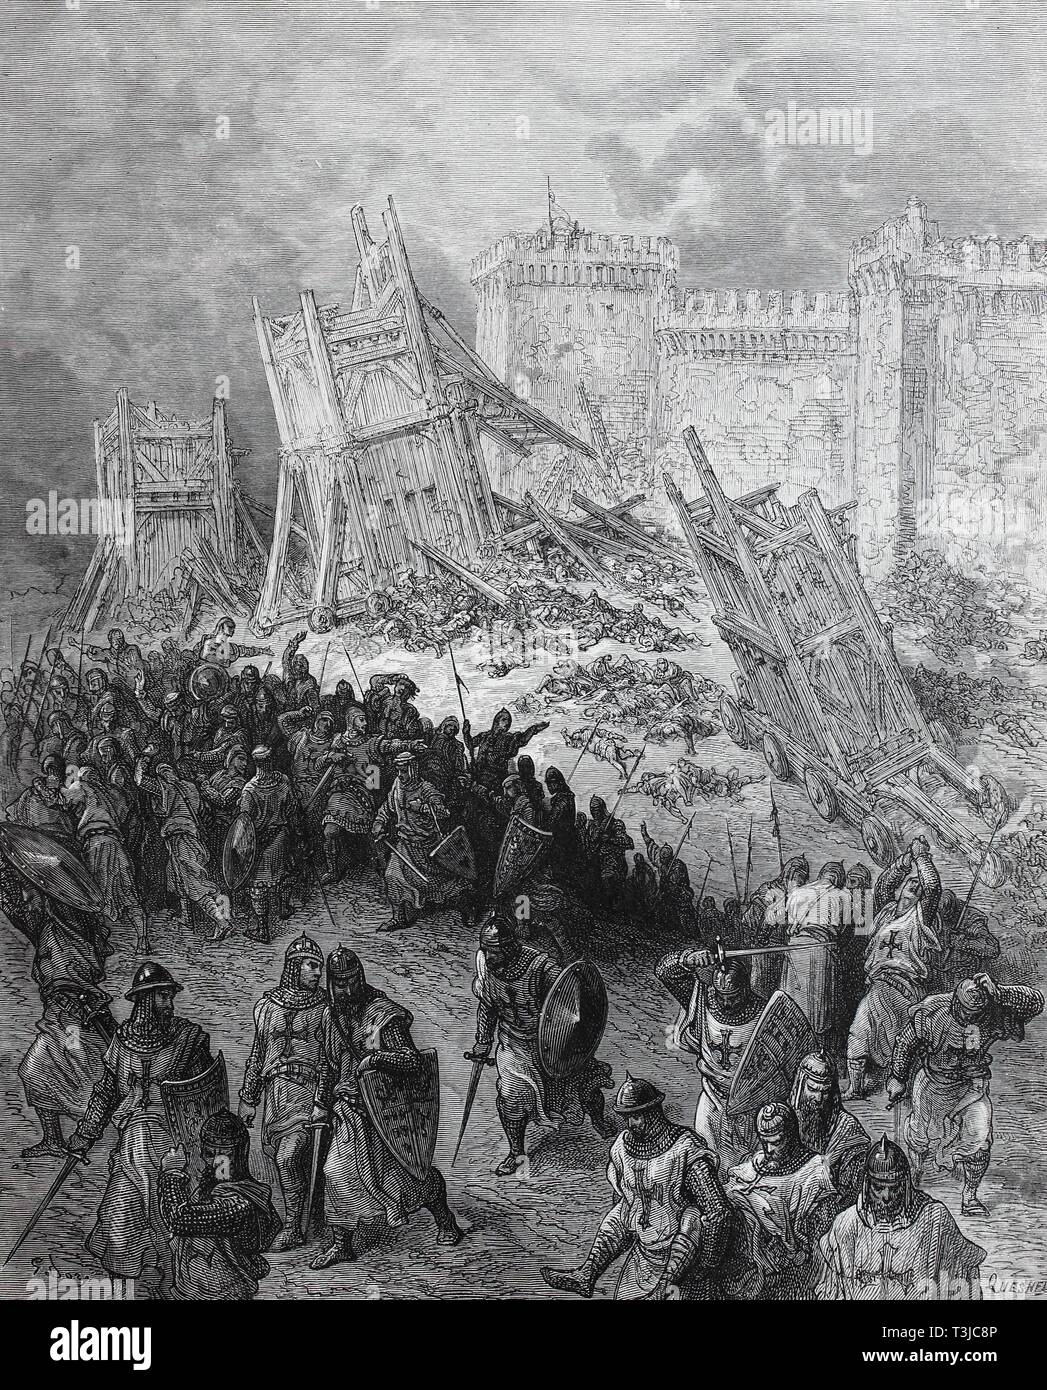 The Siege of Jerusalem took place from June 7 to July 15, 1099, during the First Crusade, historical illustration, 1880, Germany Stock Photo